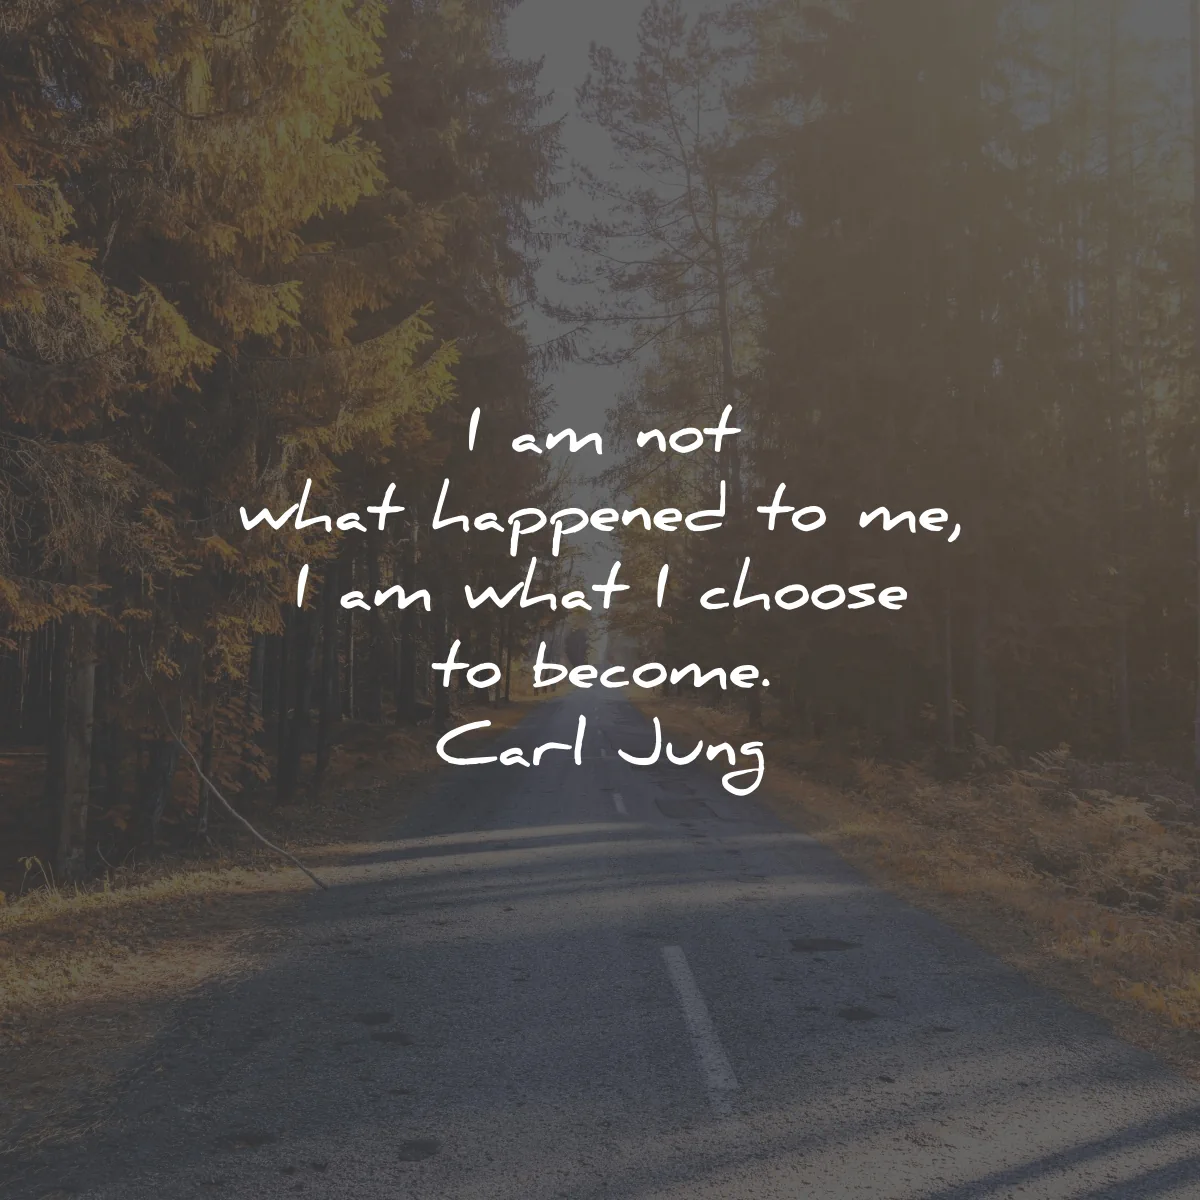 carl jung quotes what happened choose become wisdom